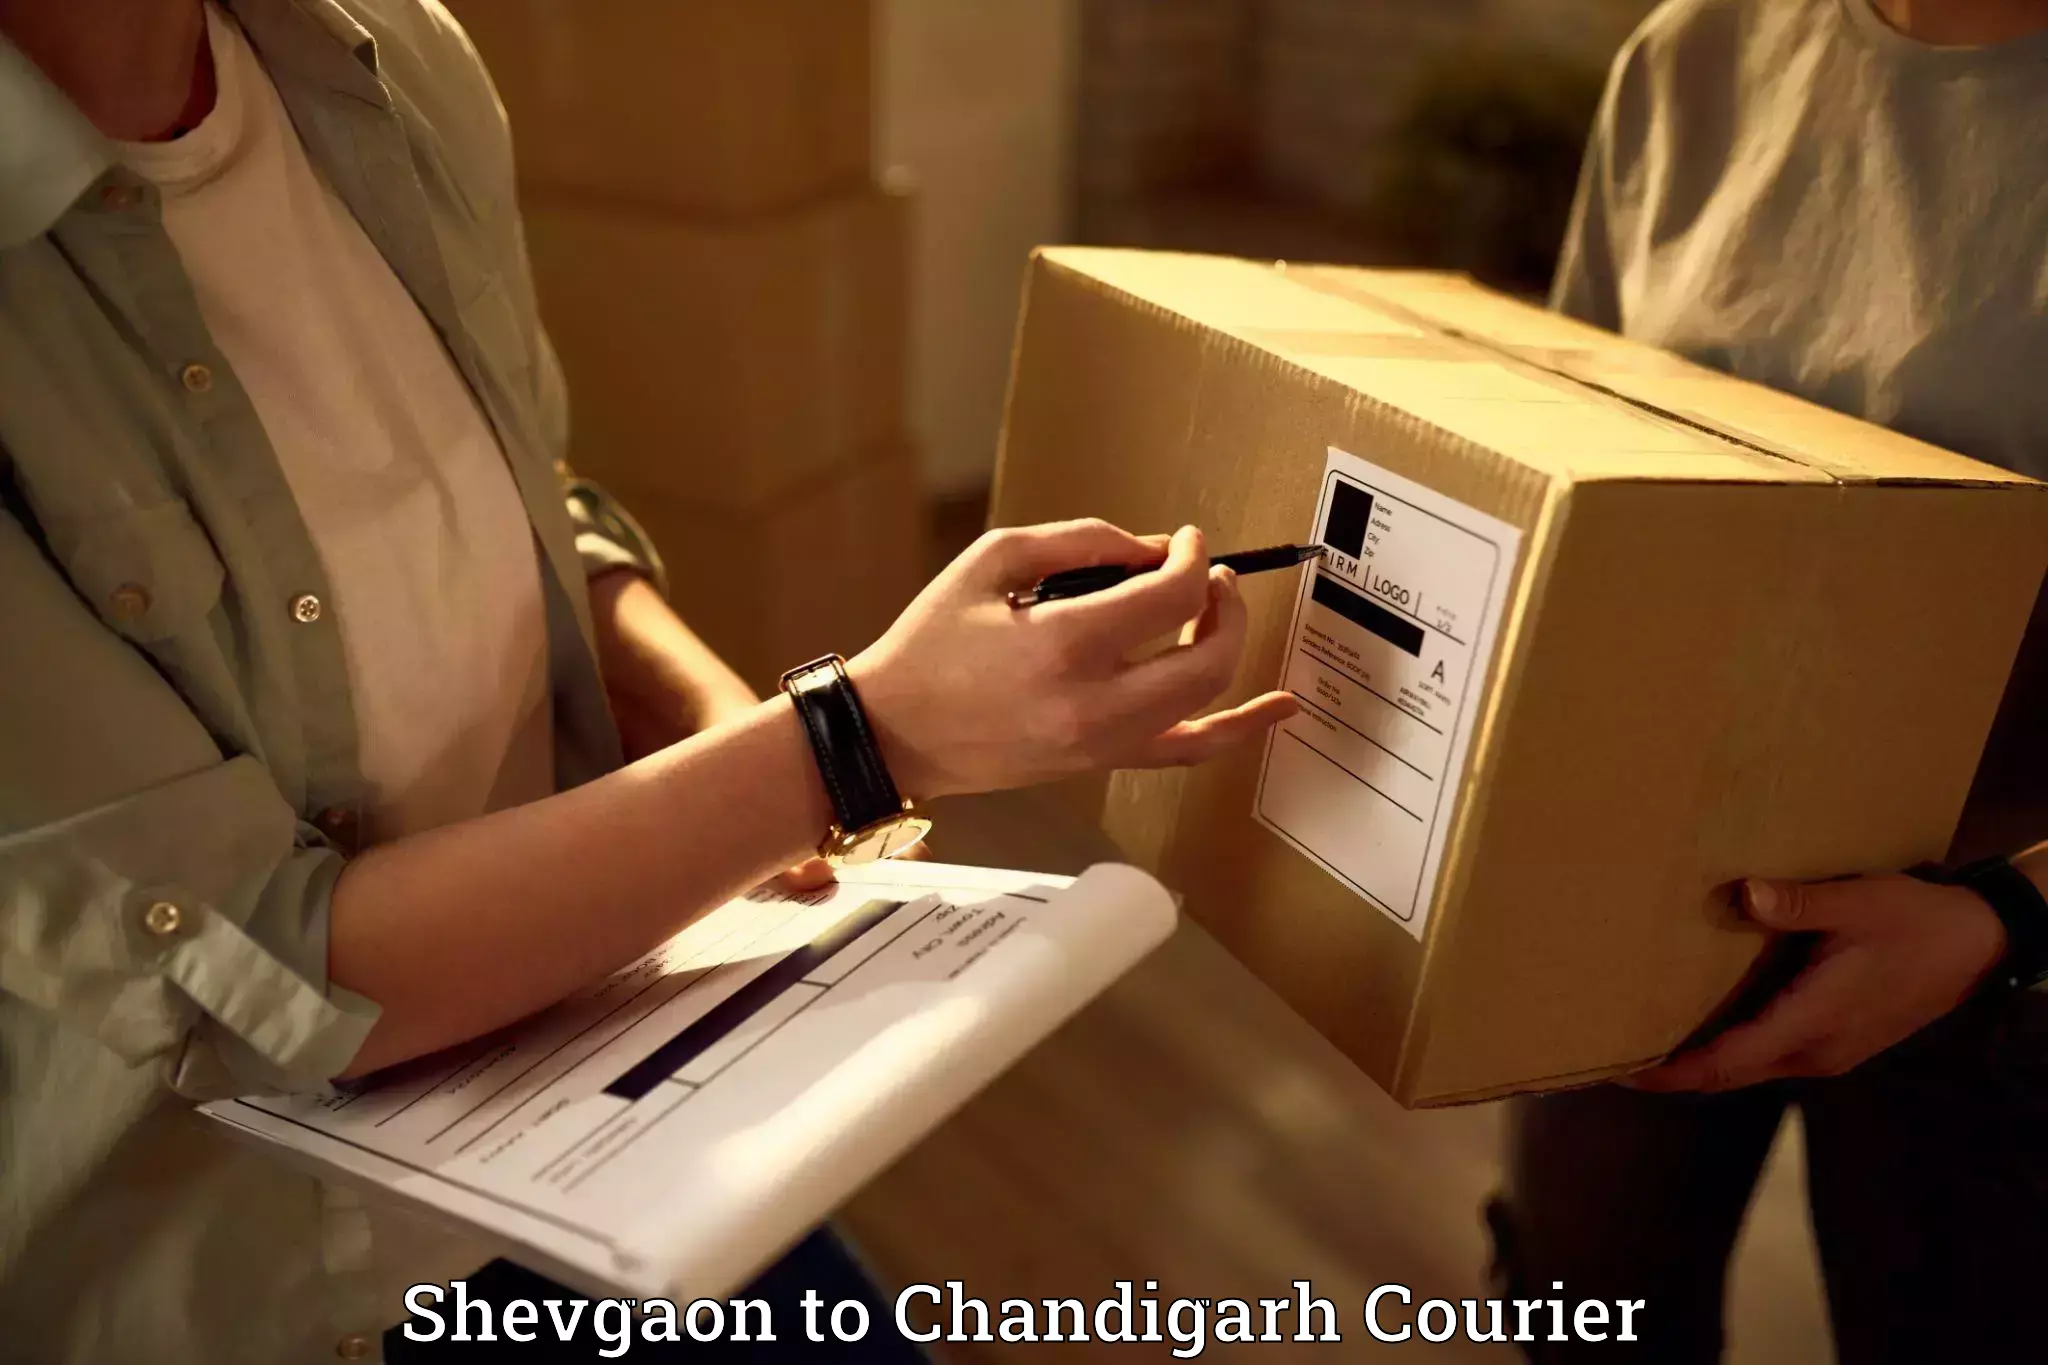 Trusted relocation experts Shevgaon to Chandigarh